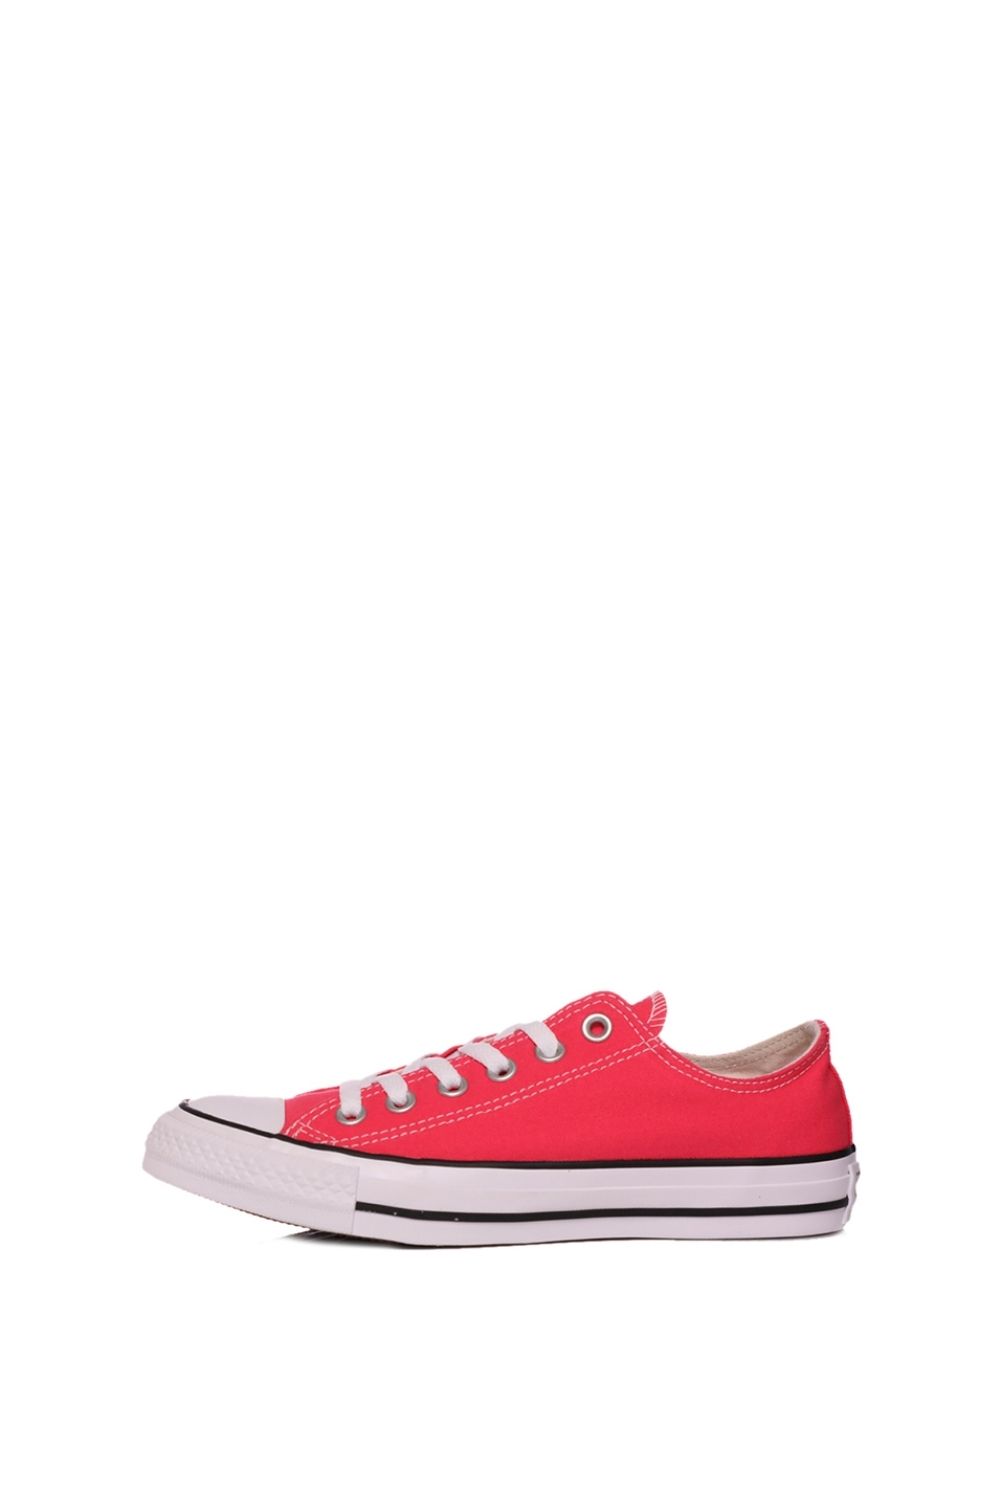 CONVERSE – Unisex sneakers CONVERSE Chuck Taylor All Star ροζ